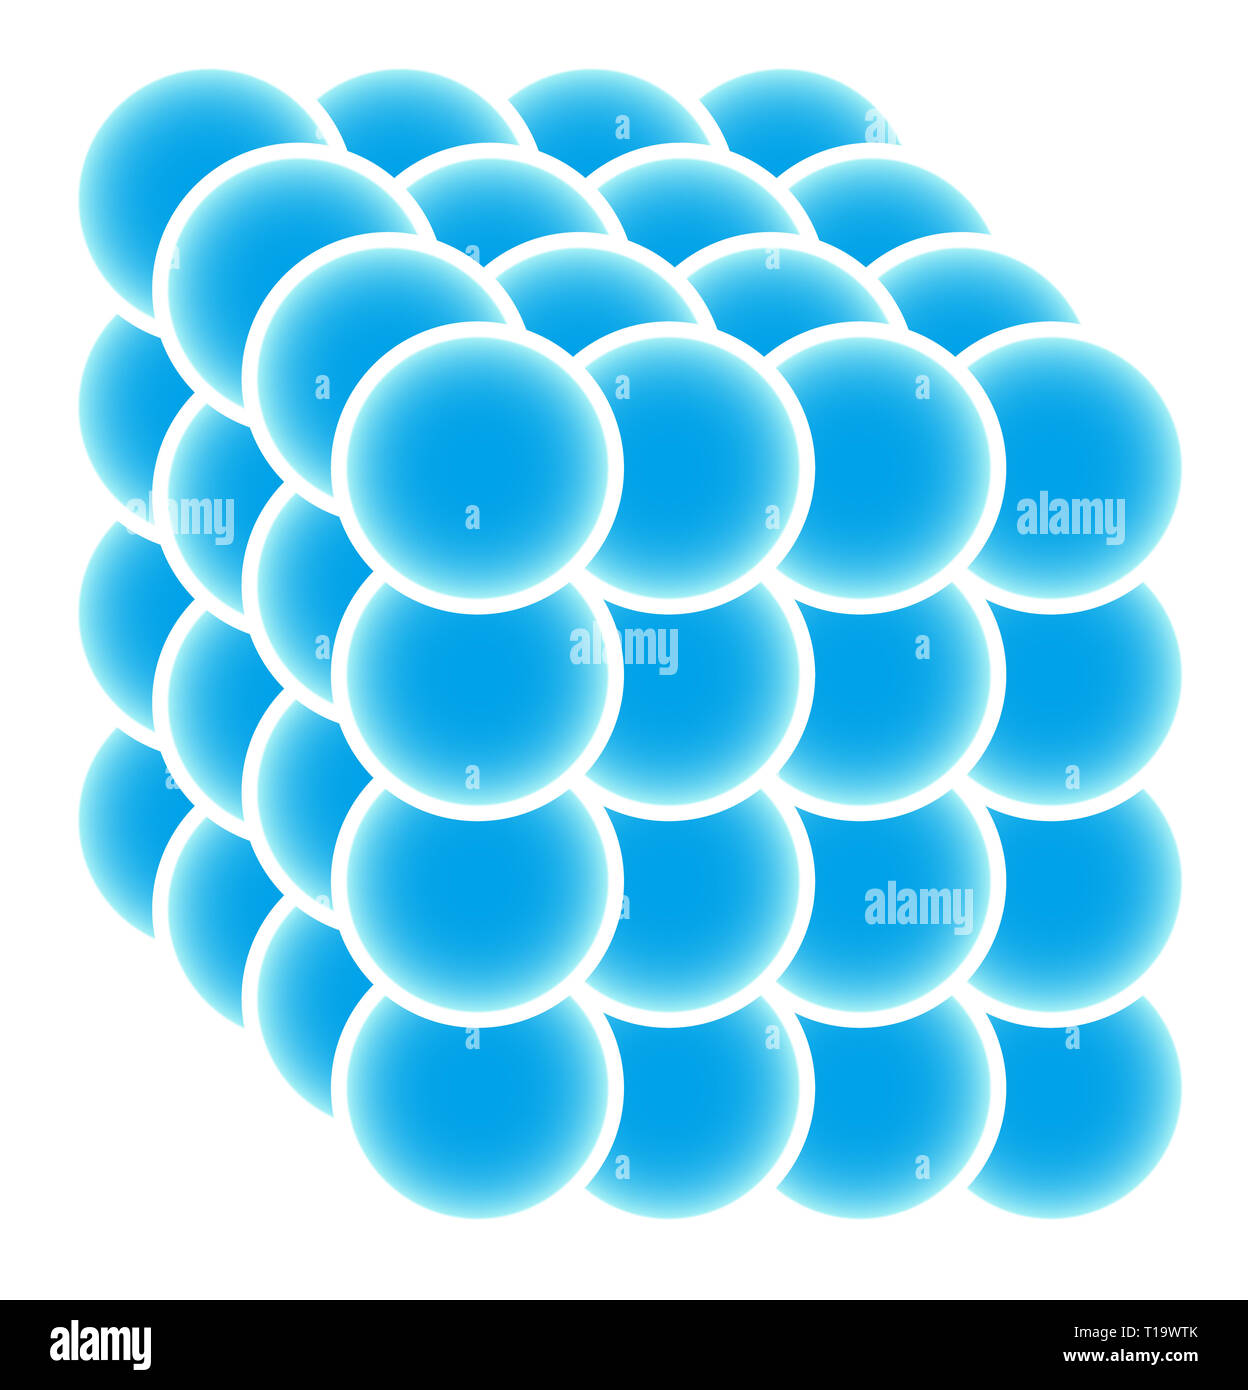 Cube made of blue spheres abstract geometry Stock Photo